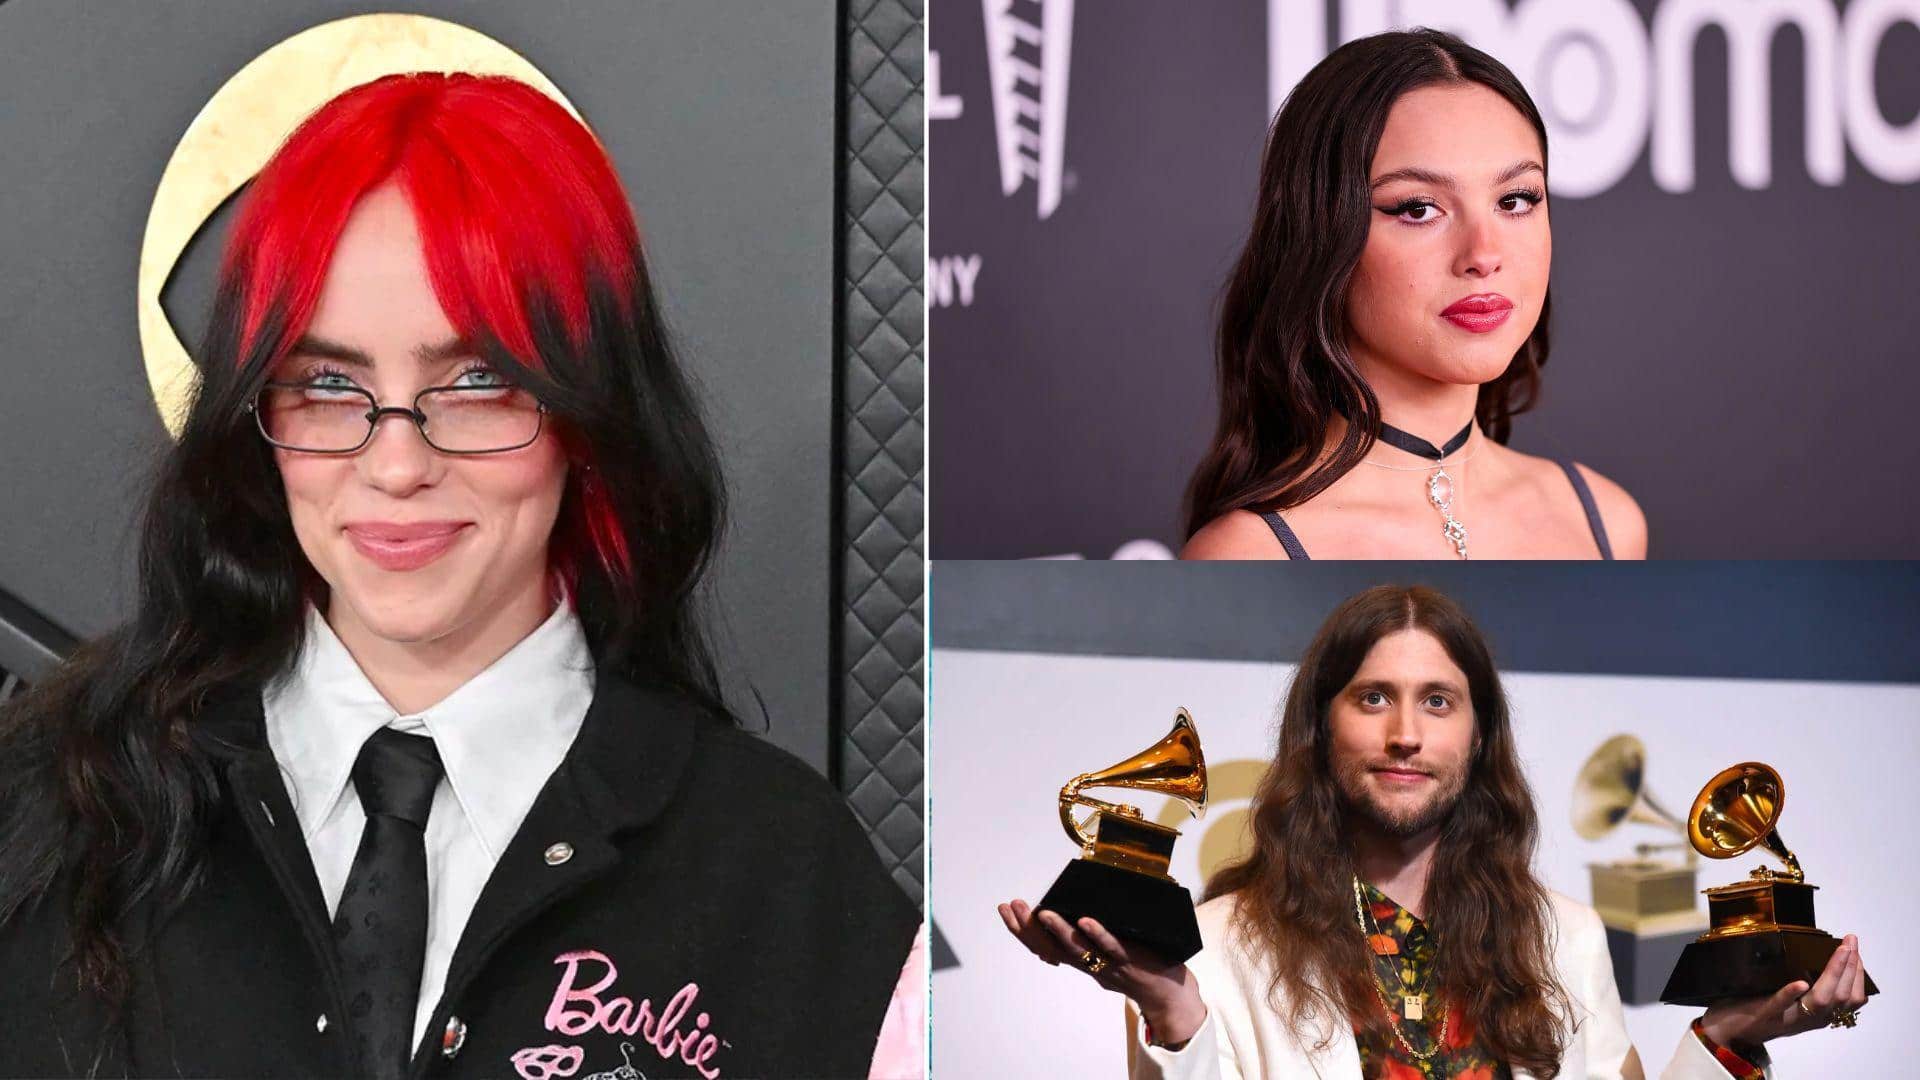 Society of Composers and Lyricists Awards: Billie Eilish wins big